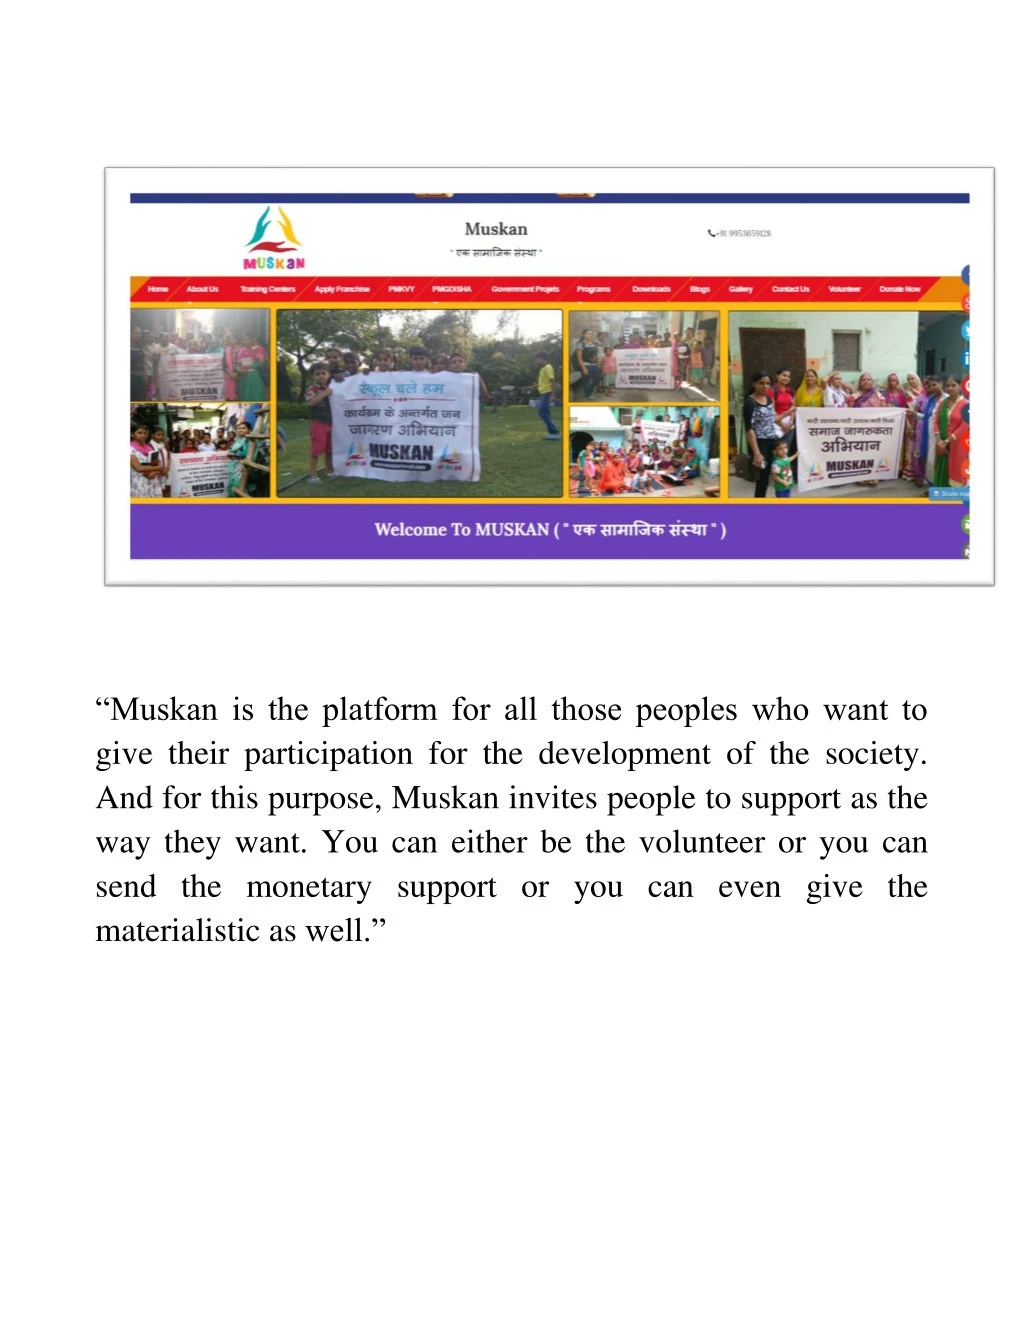 muskan is the platform for all those peoples